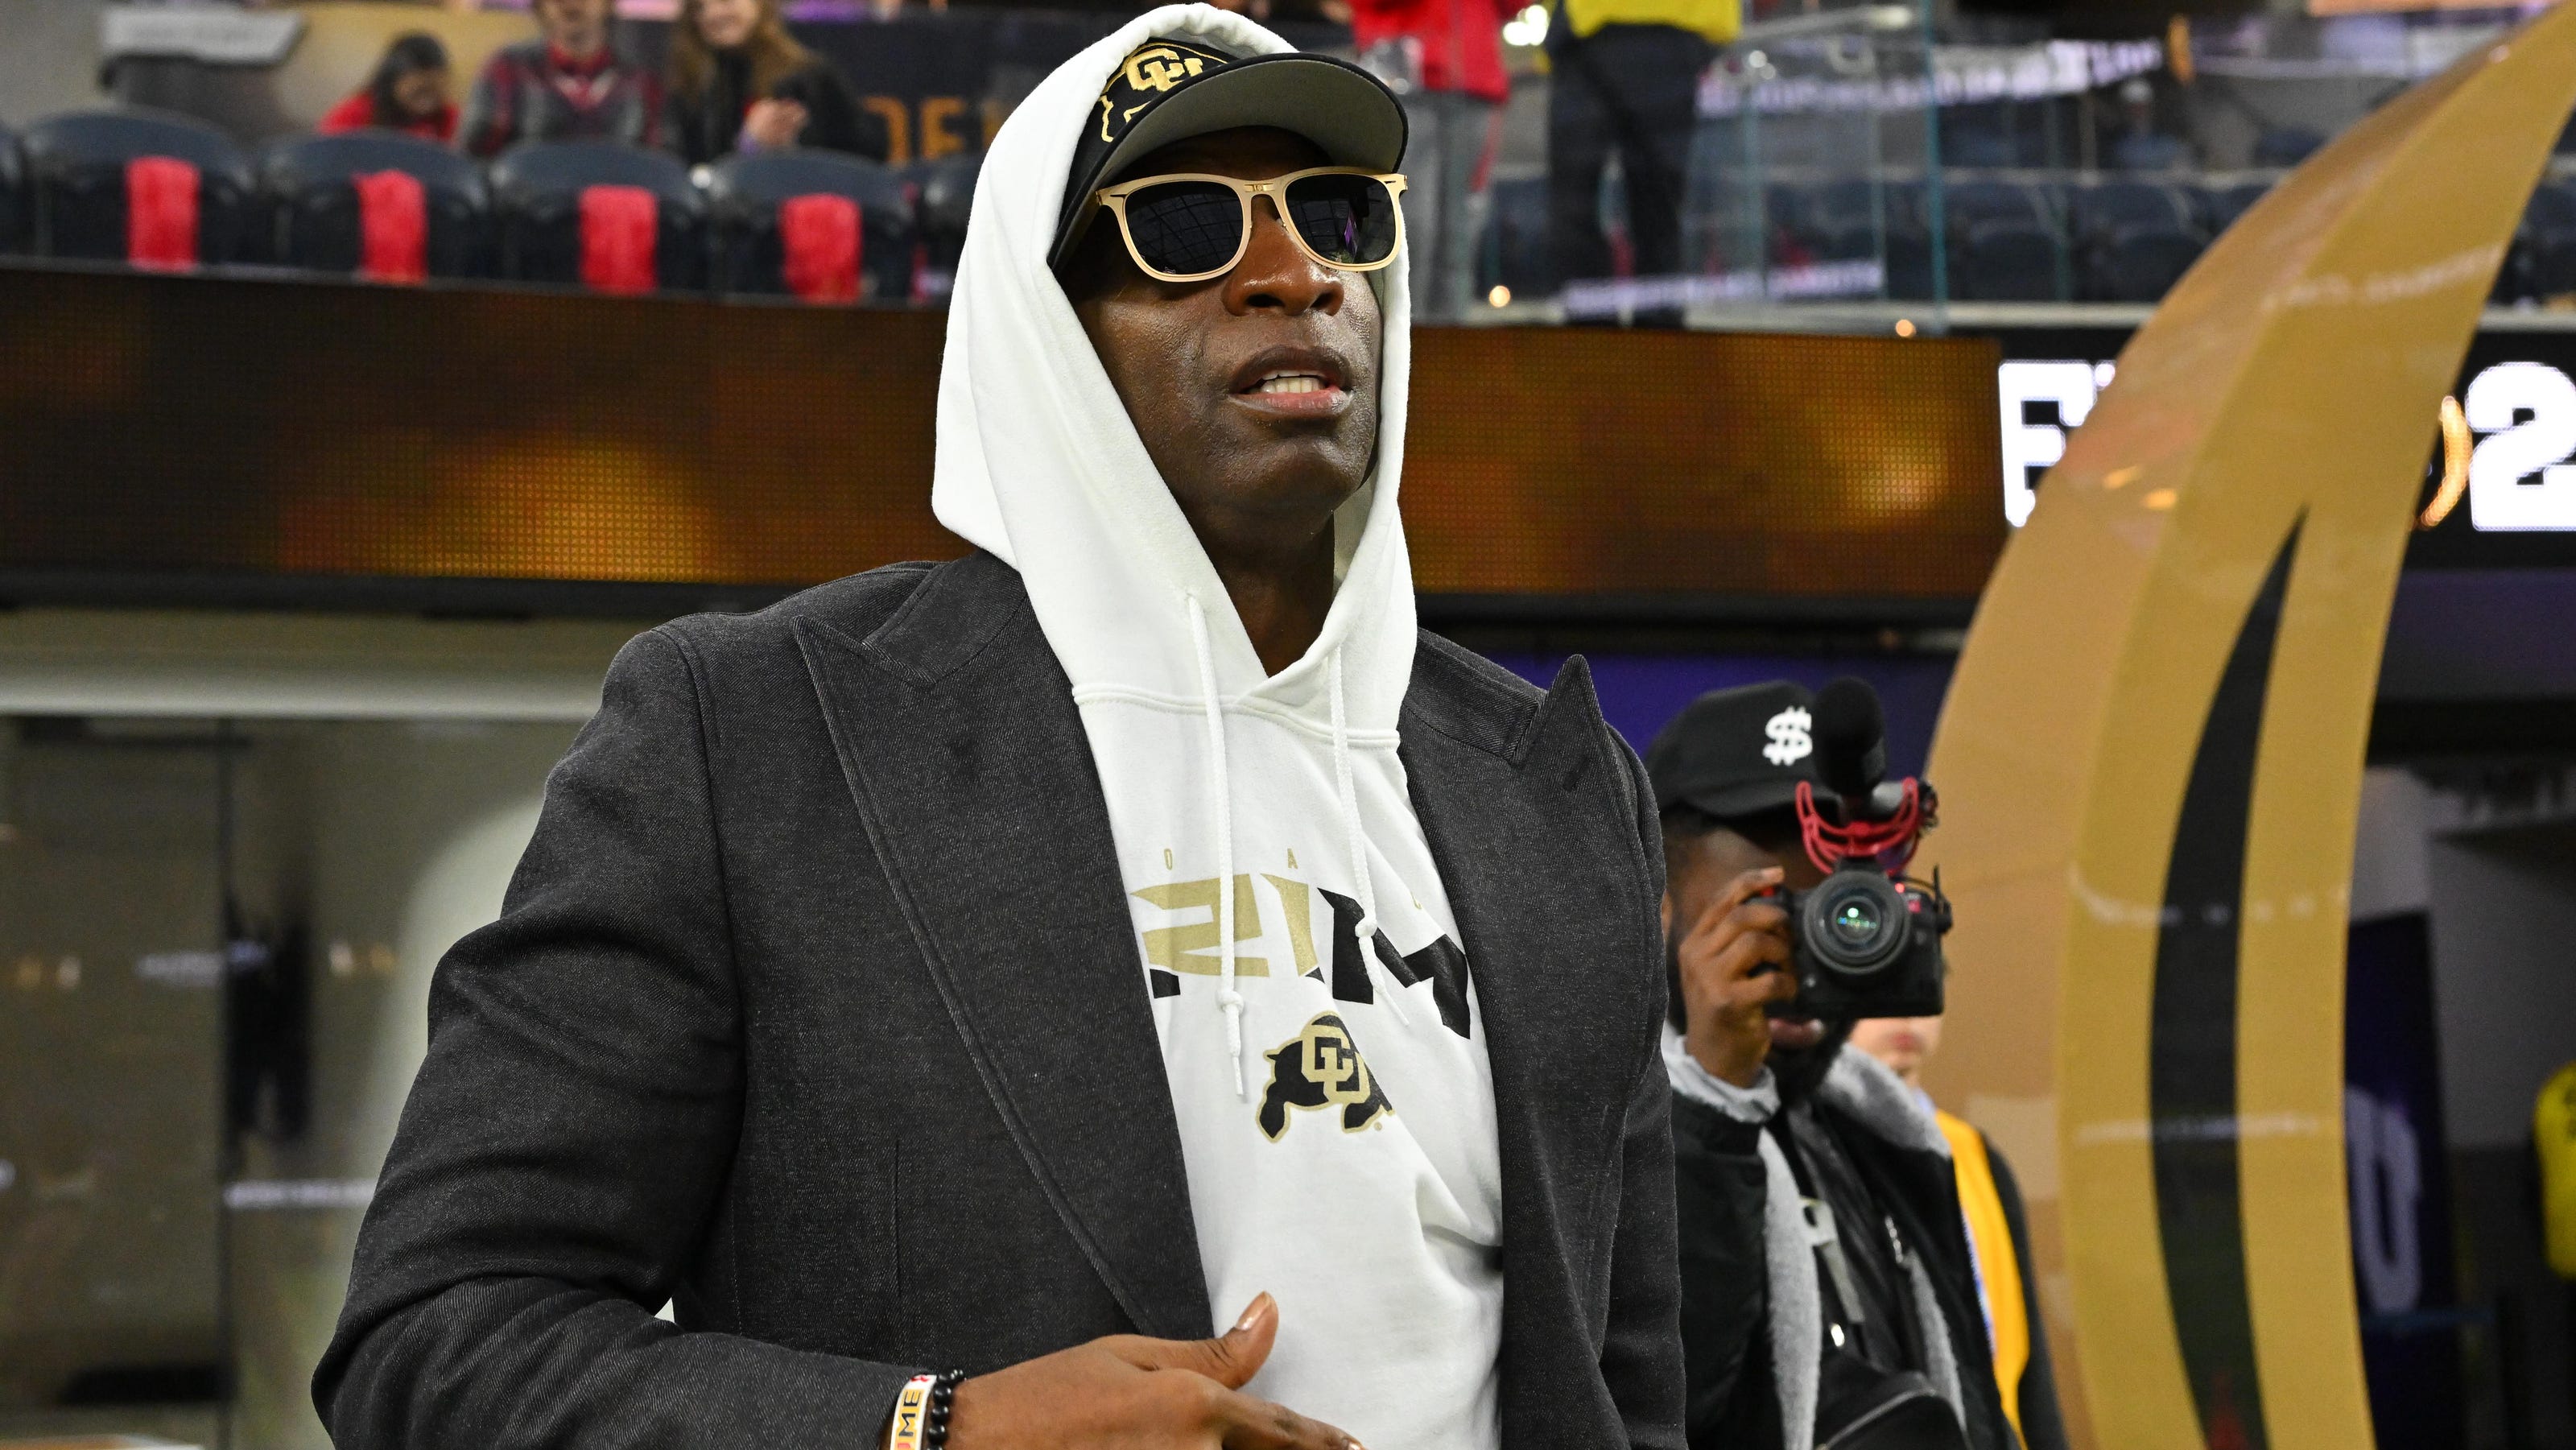 Why Deion Sanders said he'd never work with Nike again ... but he is now, sort of